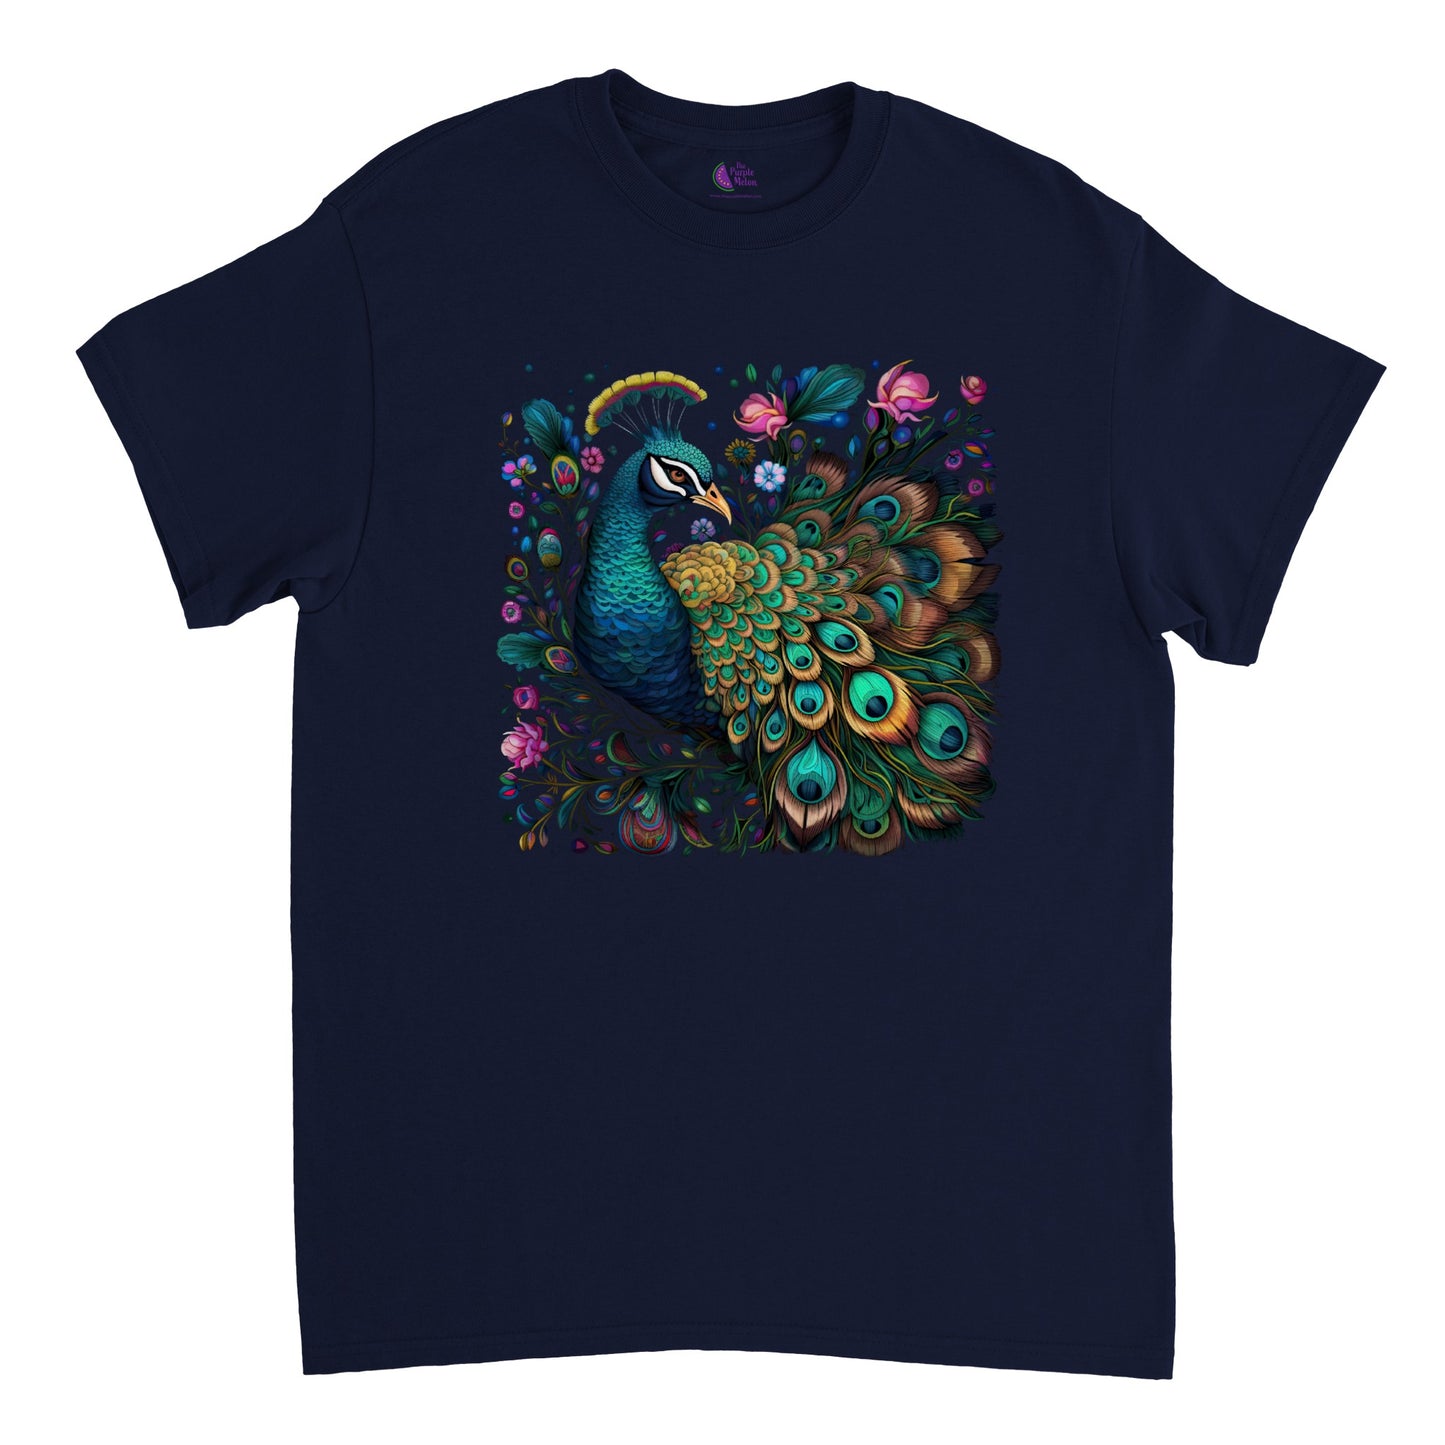 Navy blue t-shirt with a colorful floral peacock print